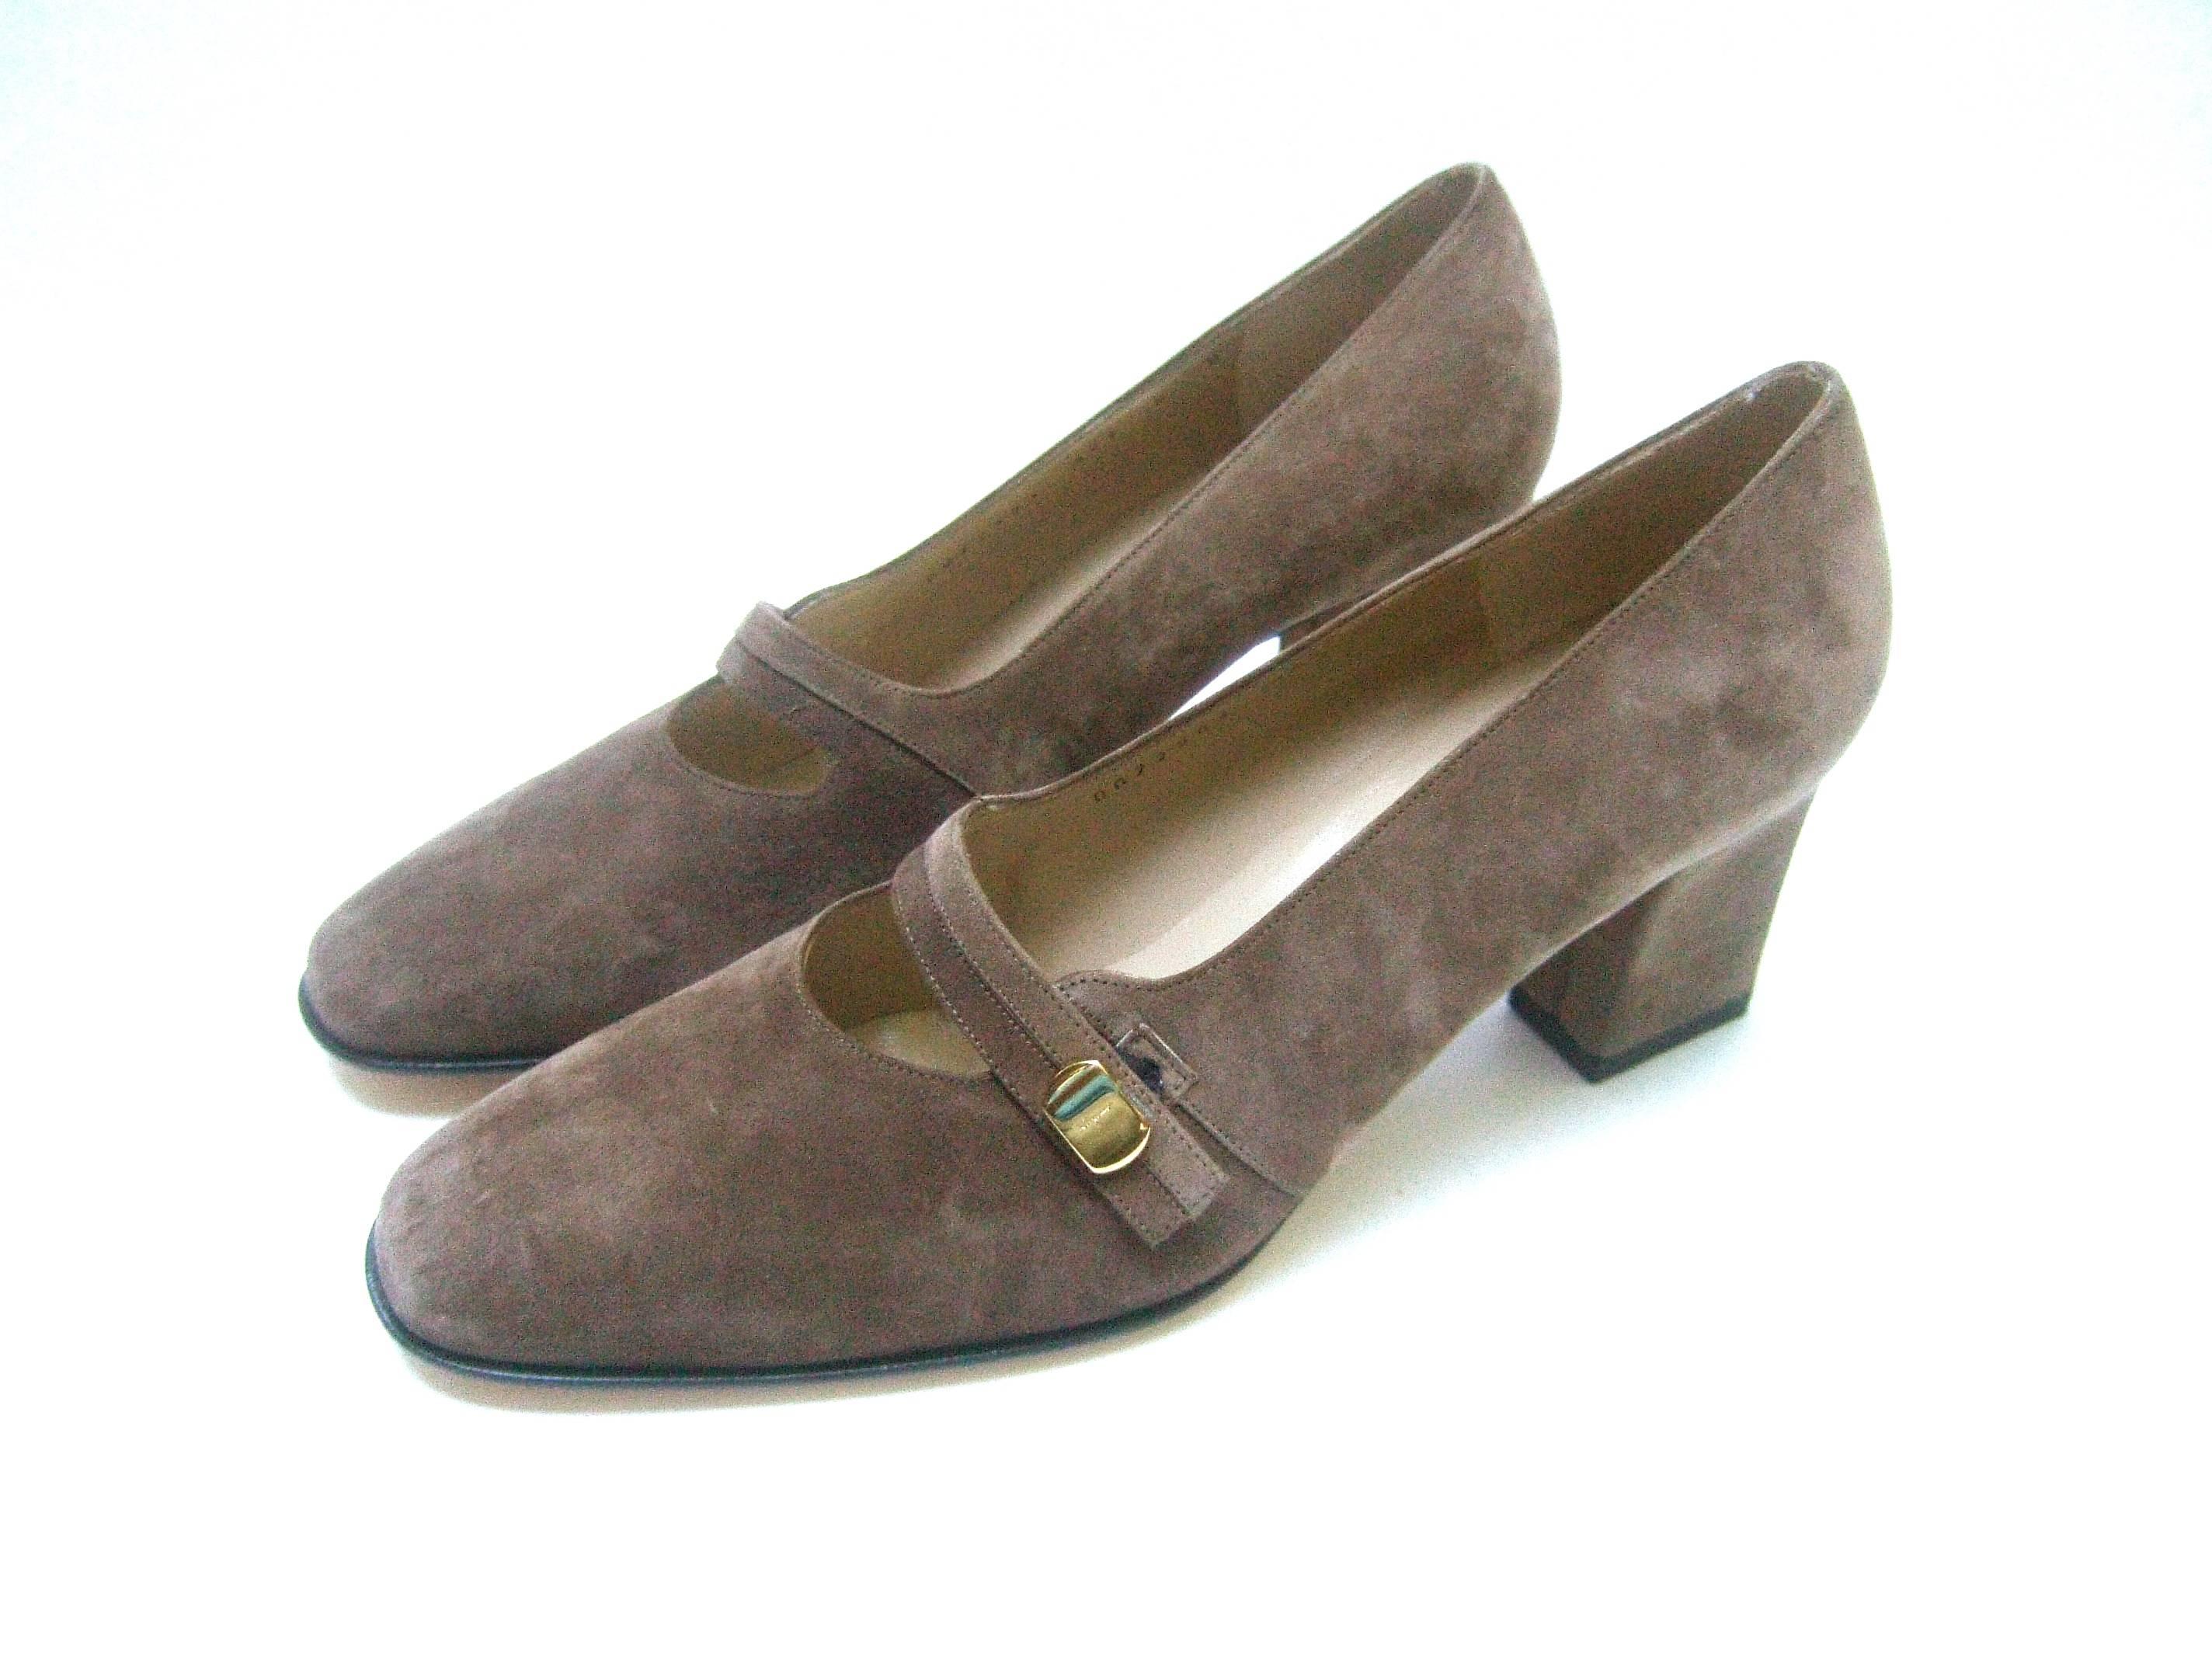 Salvatore Ferragamo Italy Mocha brown suede pumps 9 B 
The stylish designer shoes are covered with plush
light brown suede

Each shoe is adorned with a small gilt metal stationary
buckle inscribed Ferragamo. The suede pumps are new
vintage in